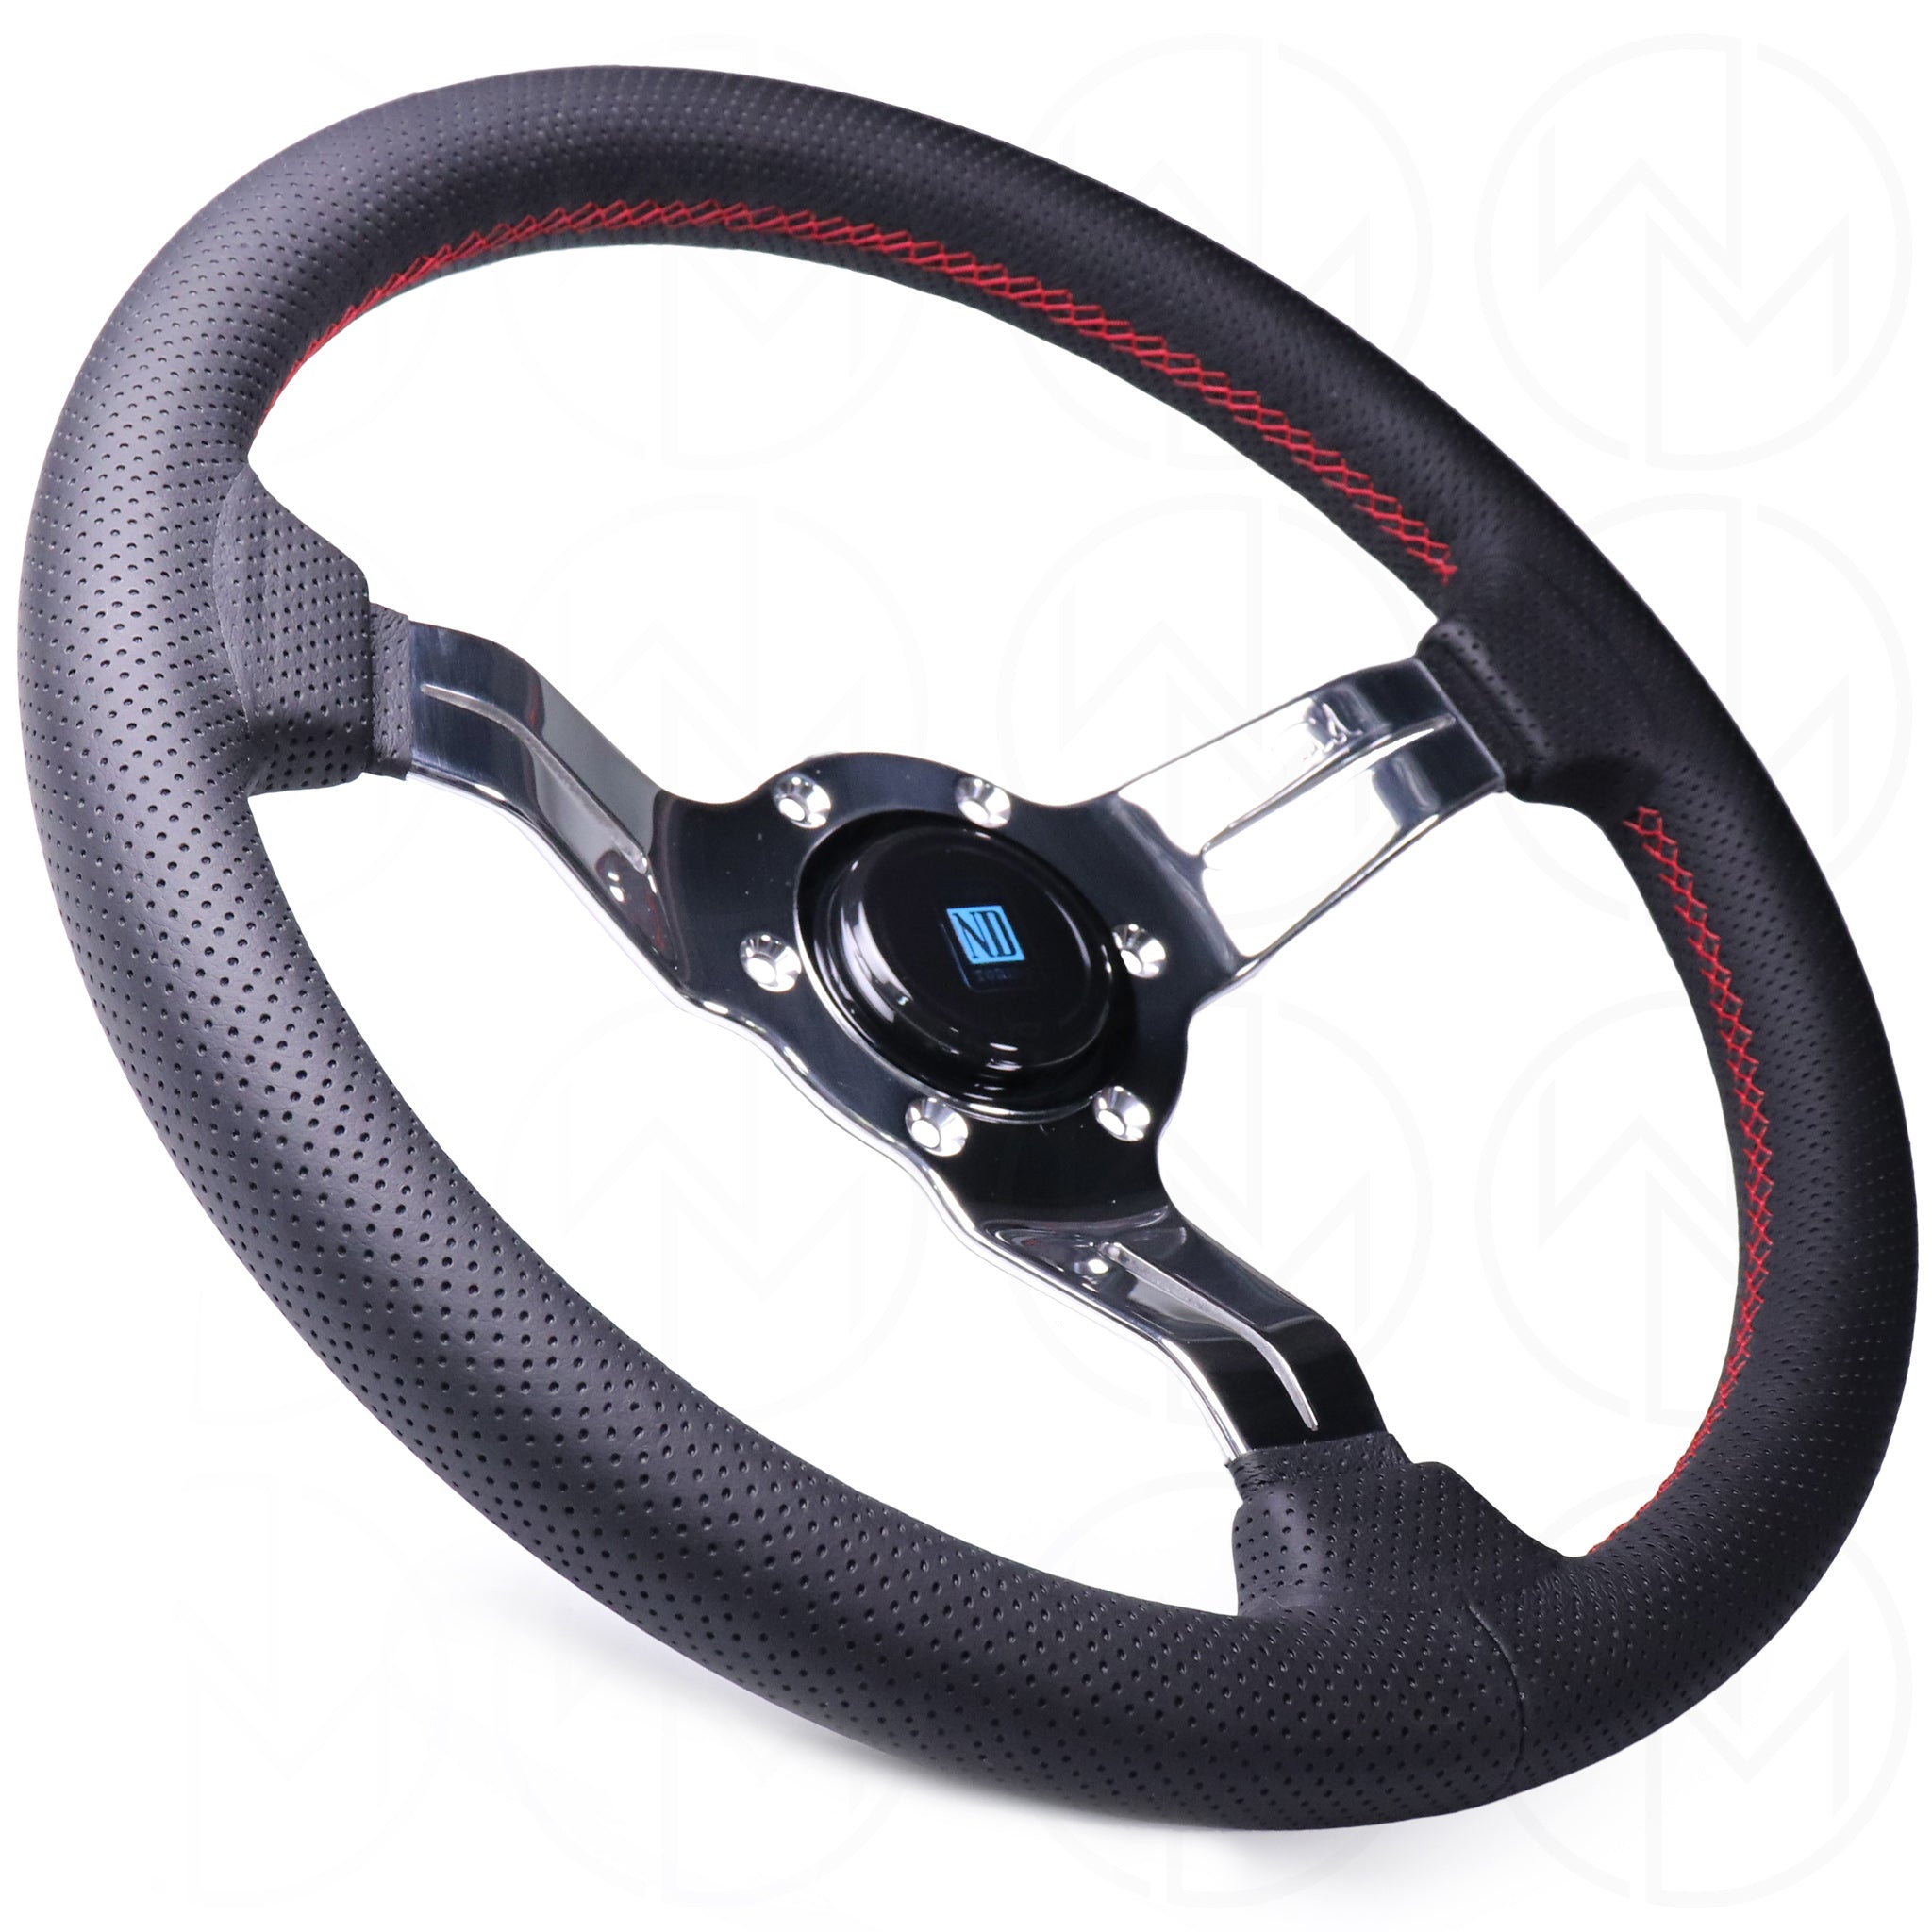 Nardi Deep Corn Steering Wheel - 330mm Perforated w/ Polished Spokes & Red Stitch